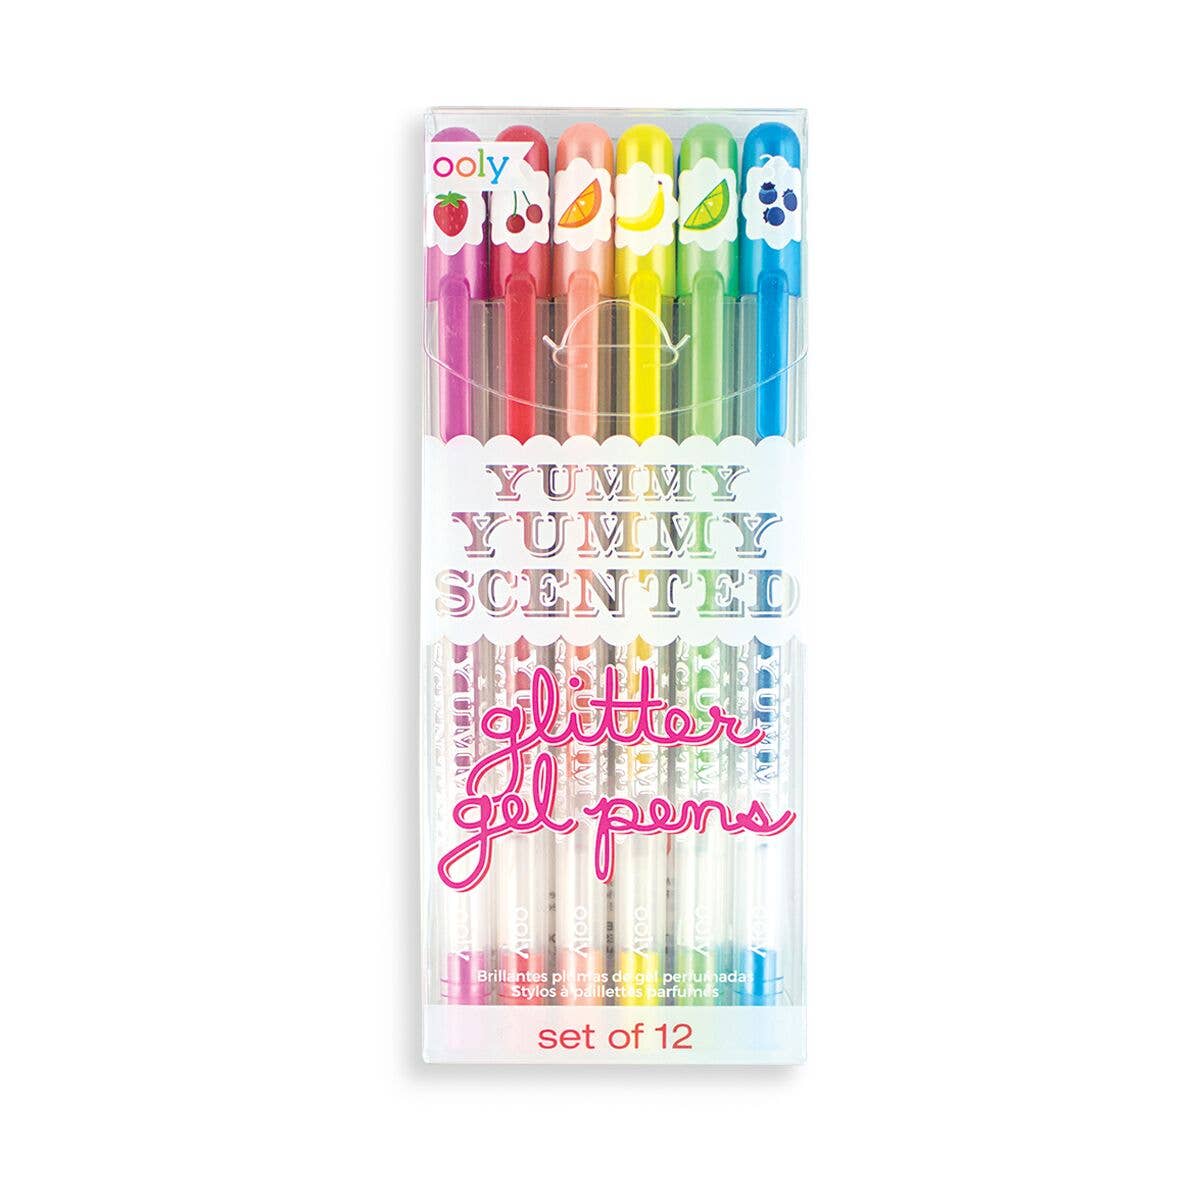 Ooly - Yummy Yummy Scented Glitter Gel Pens (10-pack)